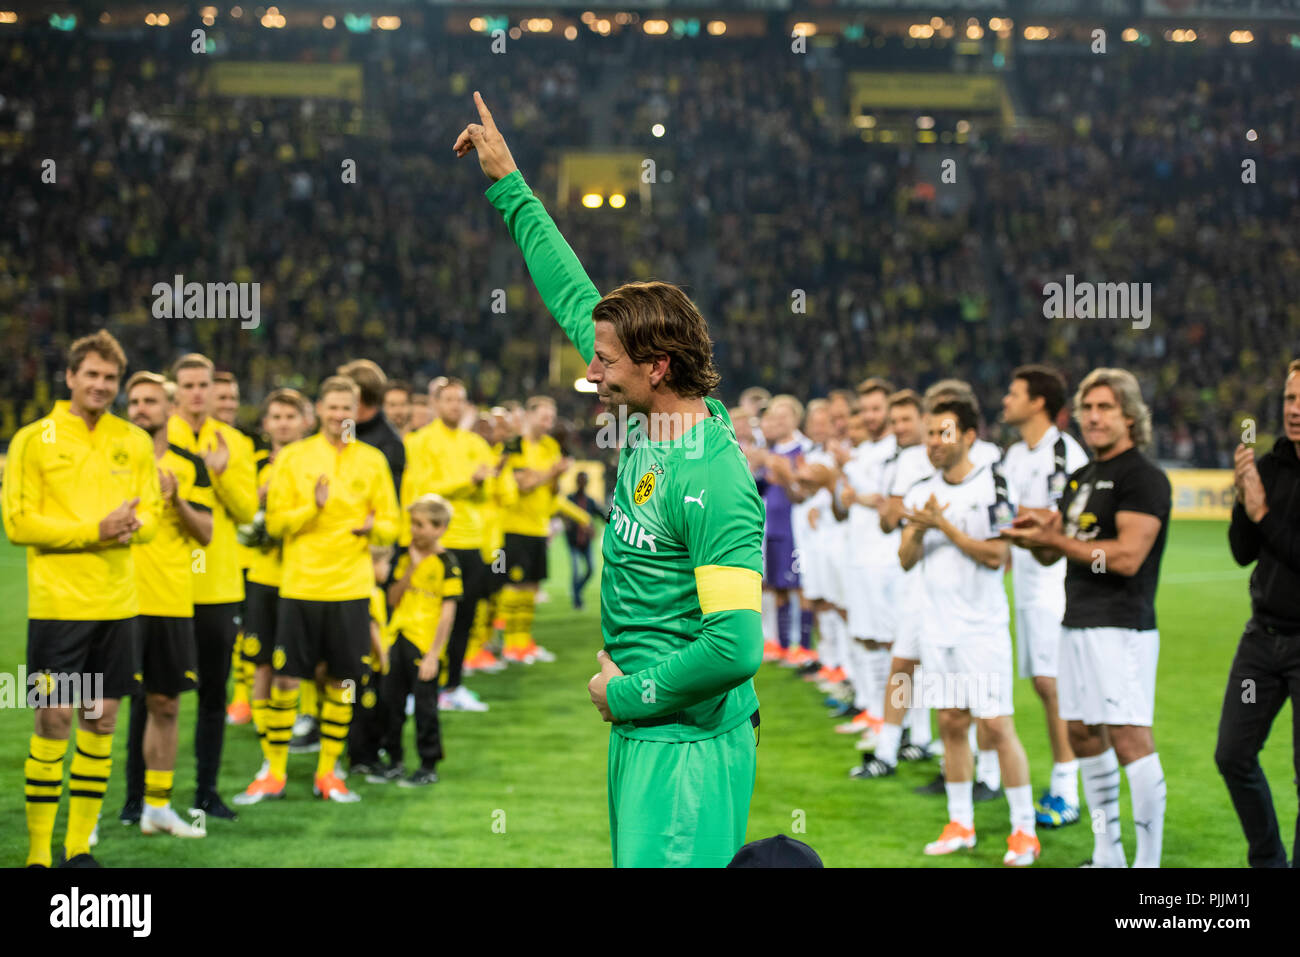 Dortmund, Germany. 07th Sep, 2018. Roman Weidenfeller's farewell match: Goalkeeper Roman Weidenfeller stands in the guard of his fellow players and opponents after the game. Credit: Bernd Thissen/dpa/Alamy Live News Stock Photo